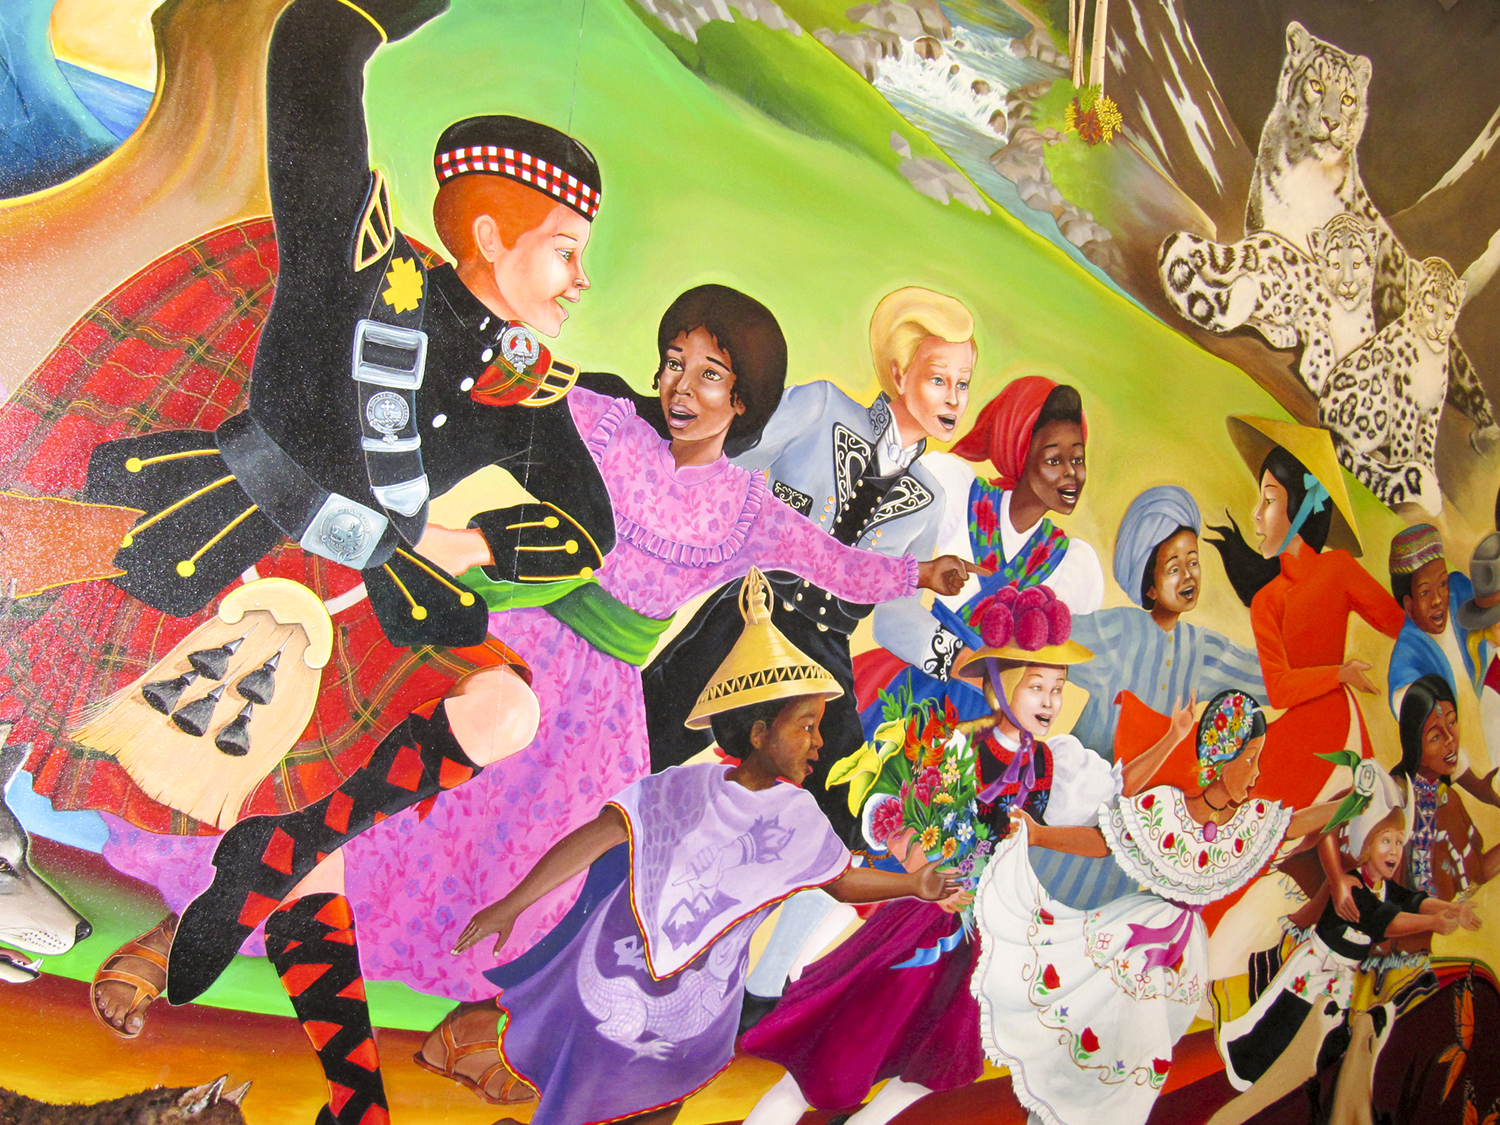 "Children of the World Dream of Peace" mural by Leo Tanguma at the Denver International airport.